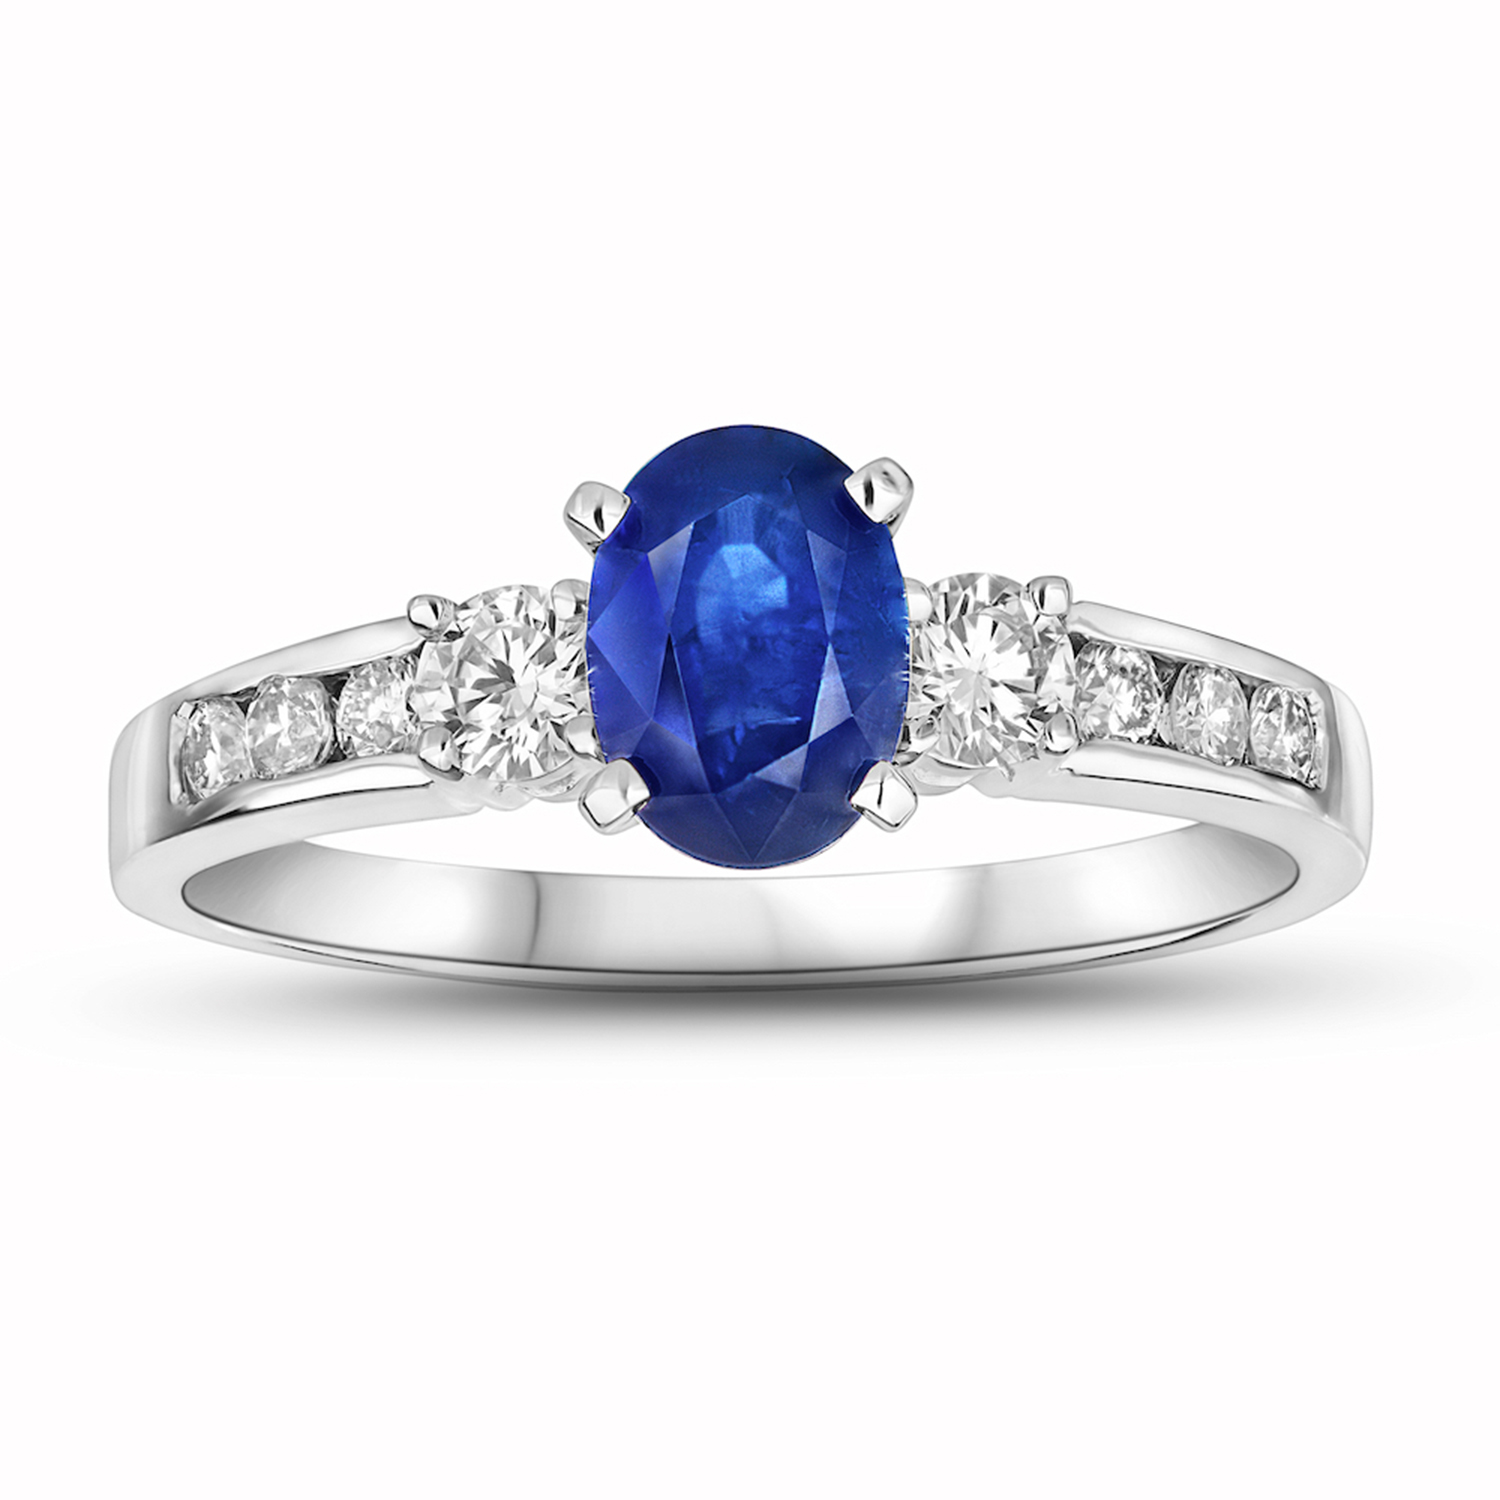 1.41cttw Oval Sapphire and Diamond Ring set in 14k Gold